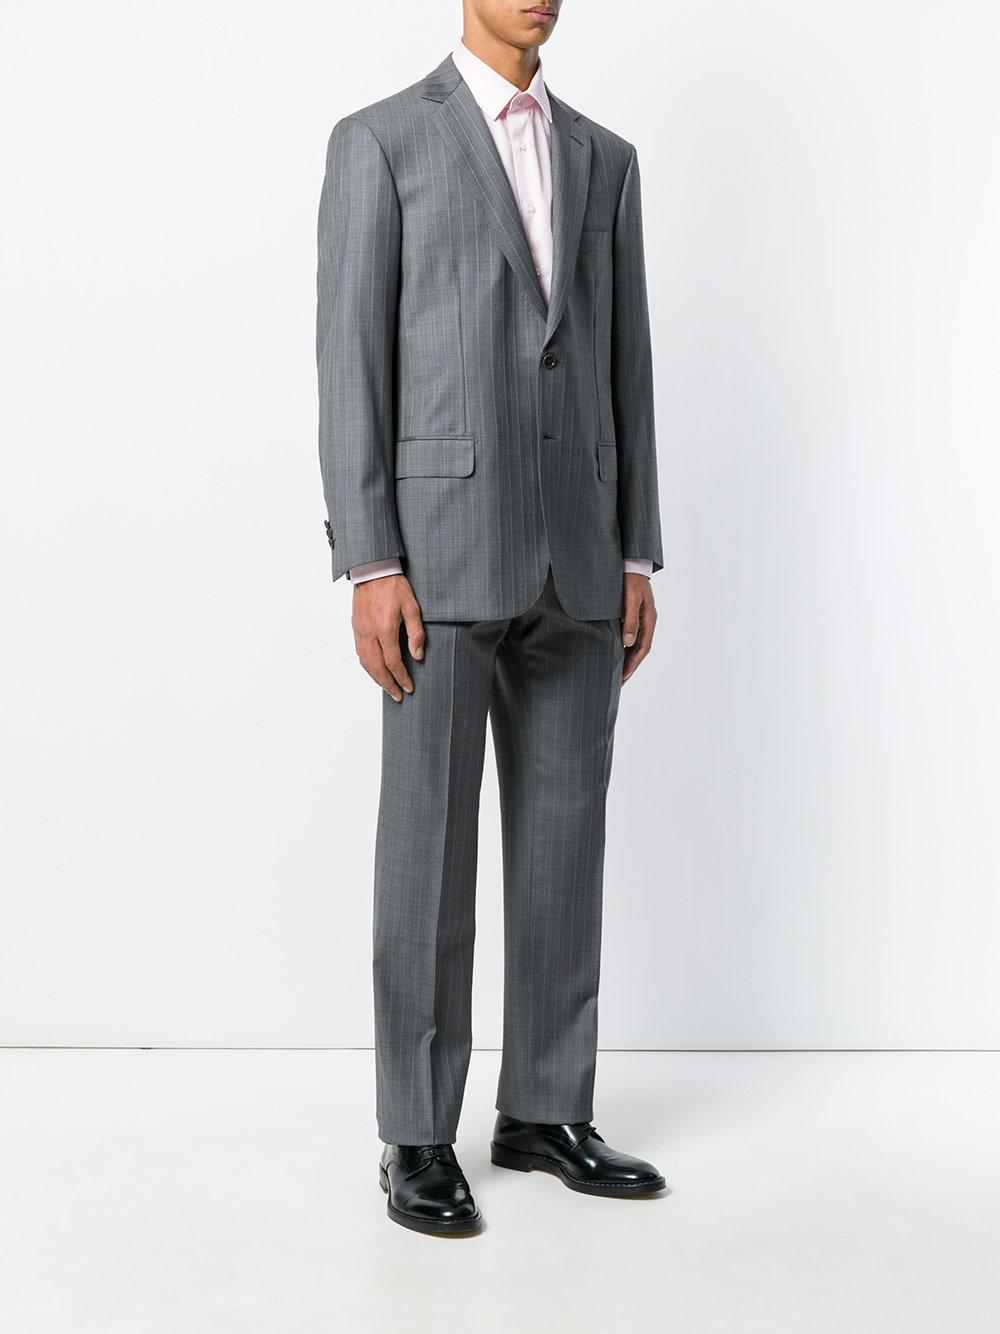 Brioni Wool Loose Fit Suit in Grey (Gray) for Men - Lyst